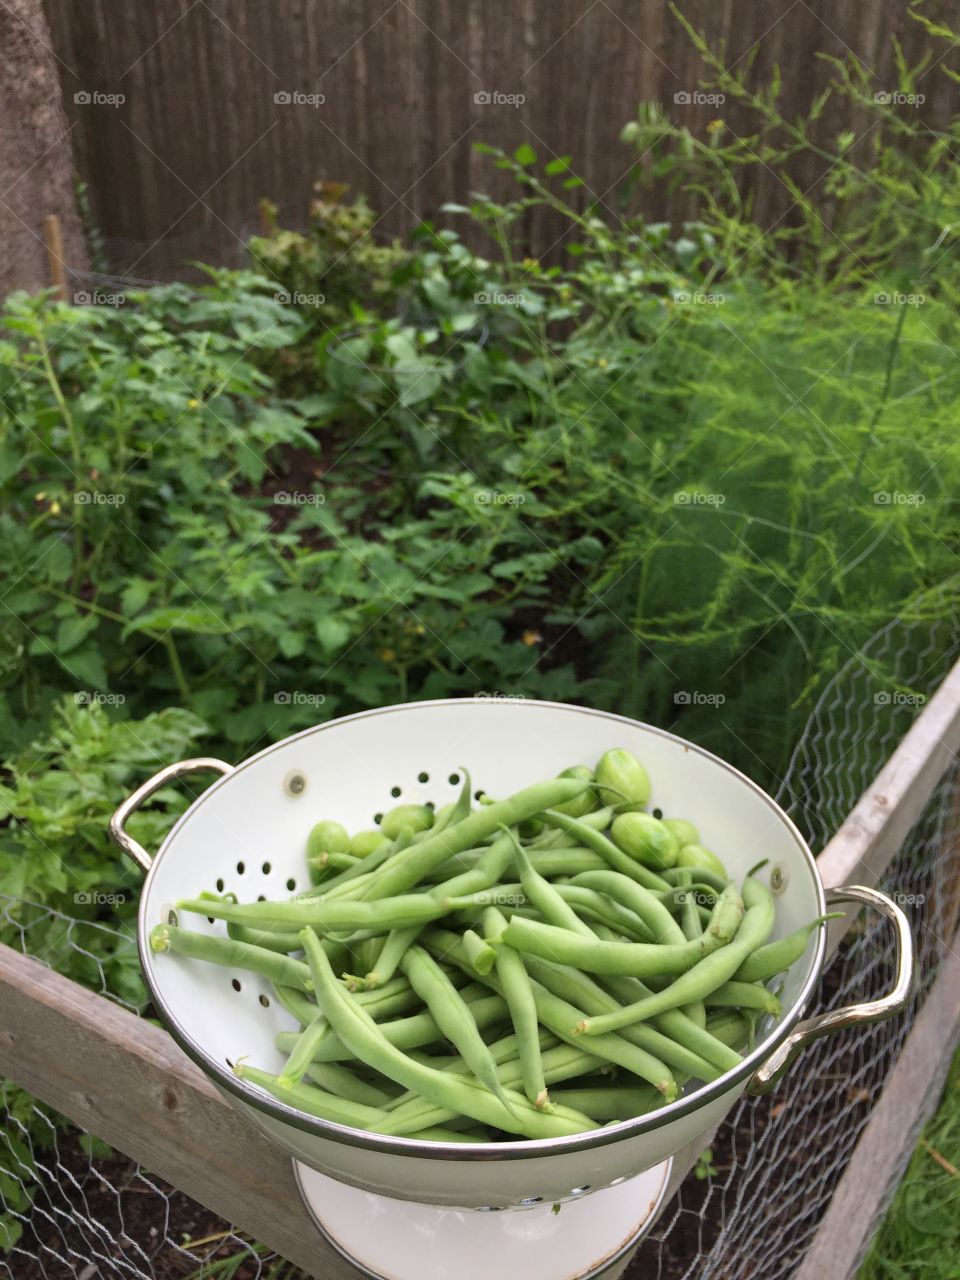 Green Beans From The Garden . Just picked green beans in a colander. 